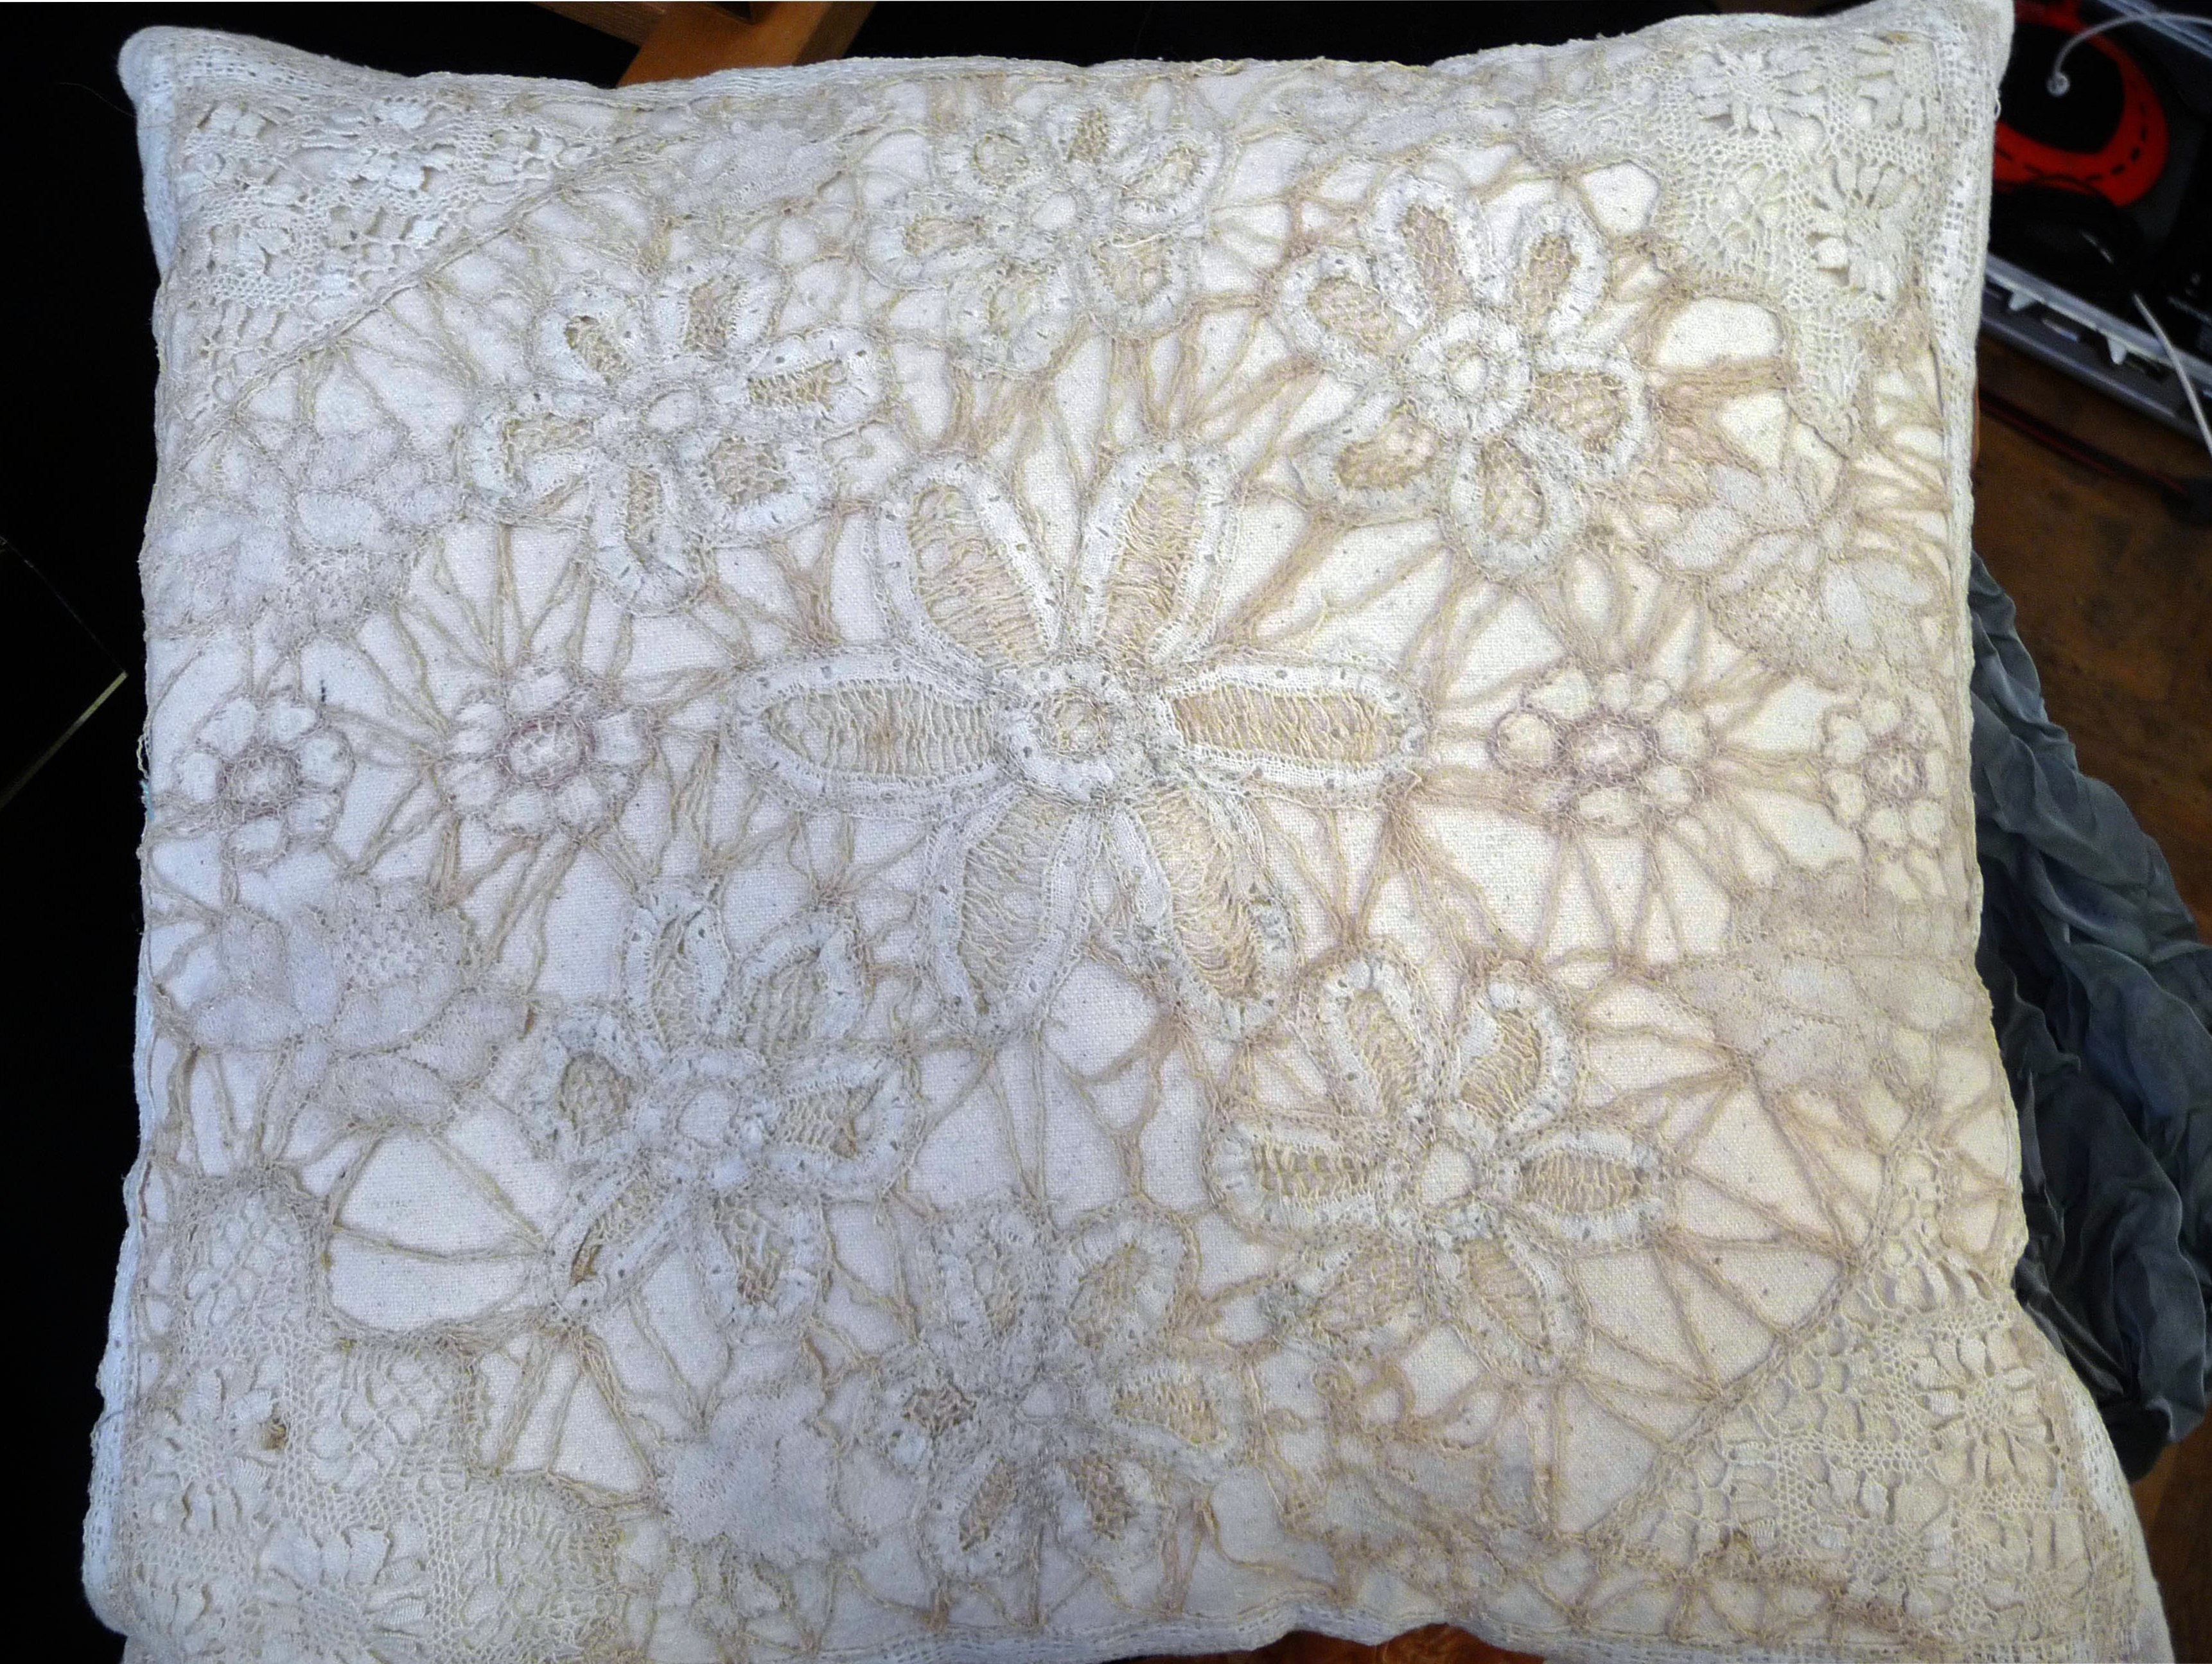 recycled lace cushion by Moya McCarthy, from her 'Neutral Phase'